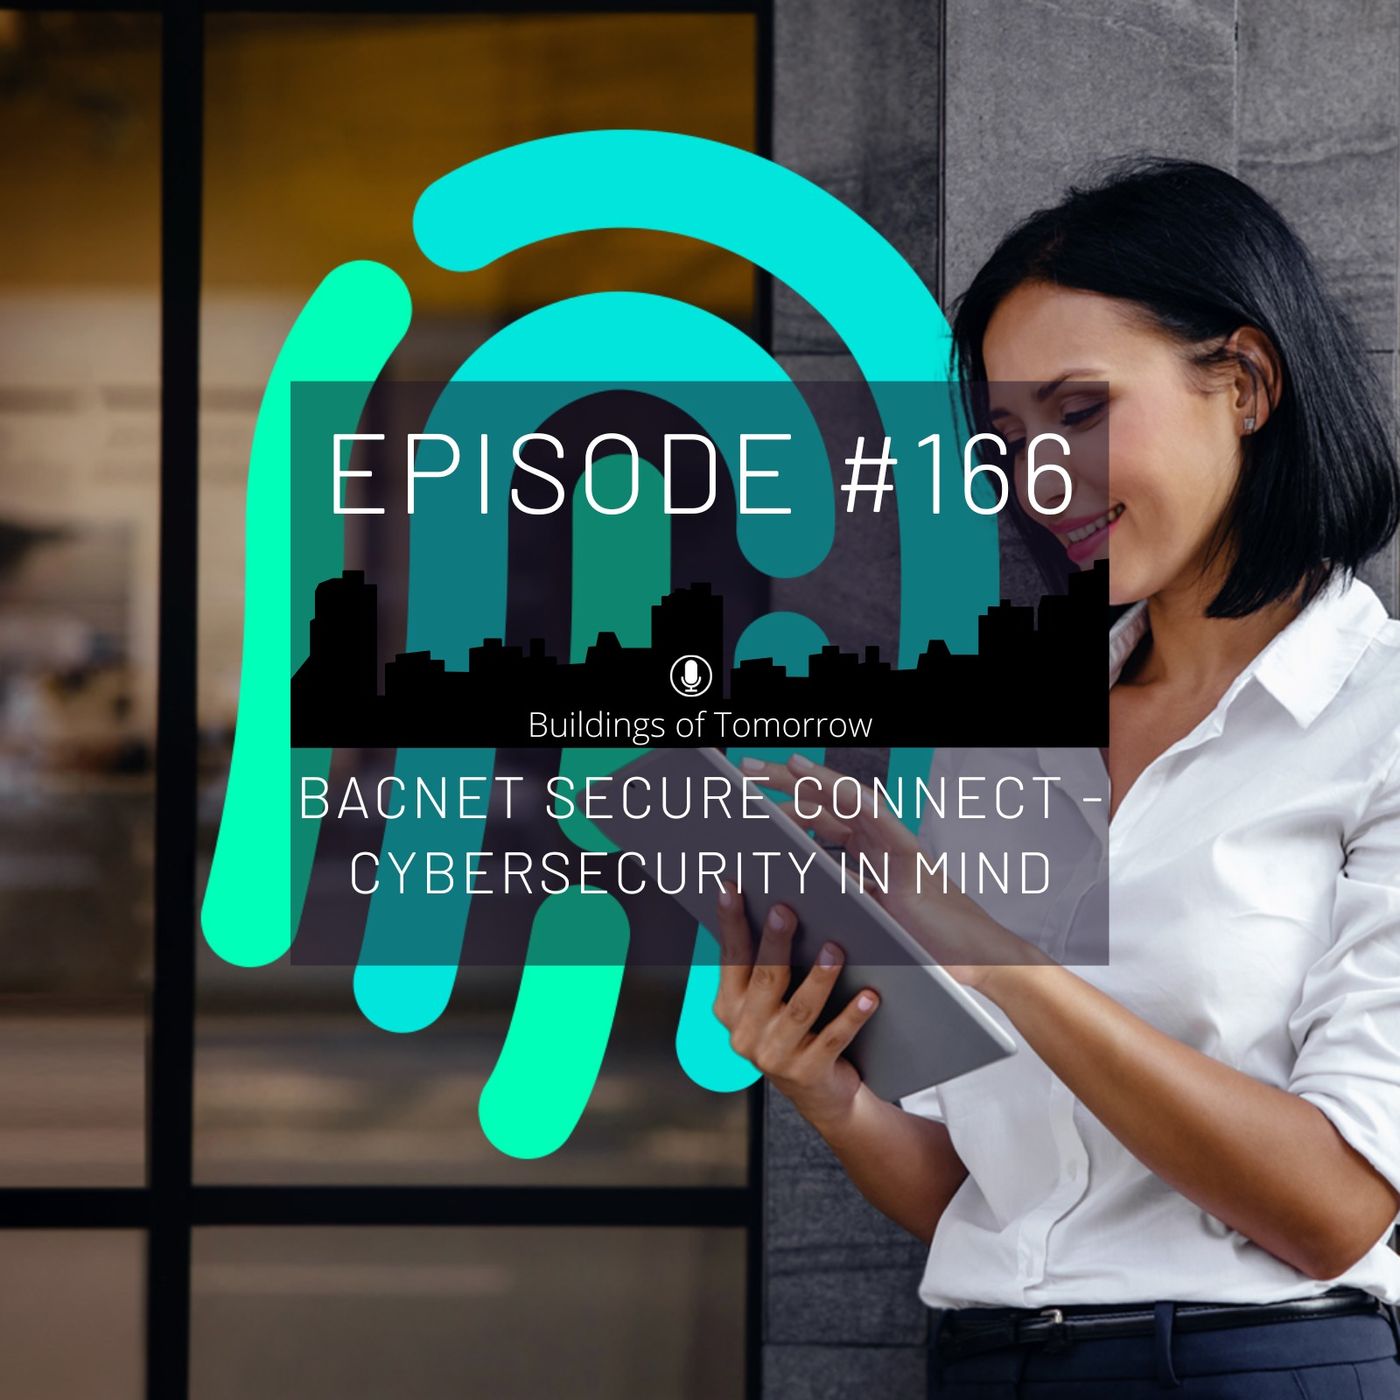 #166 BACnet Secure Connect - Cybersecurity in mind